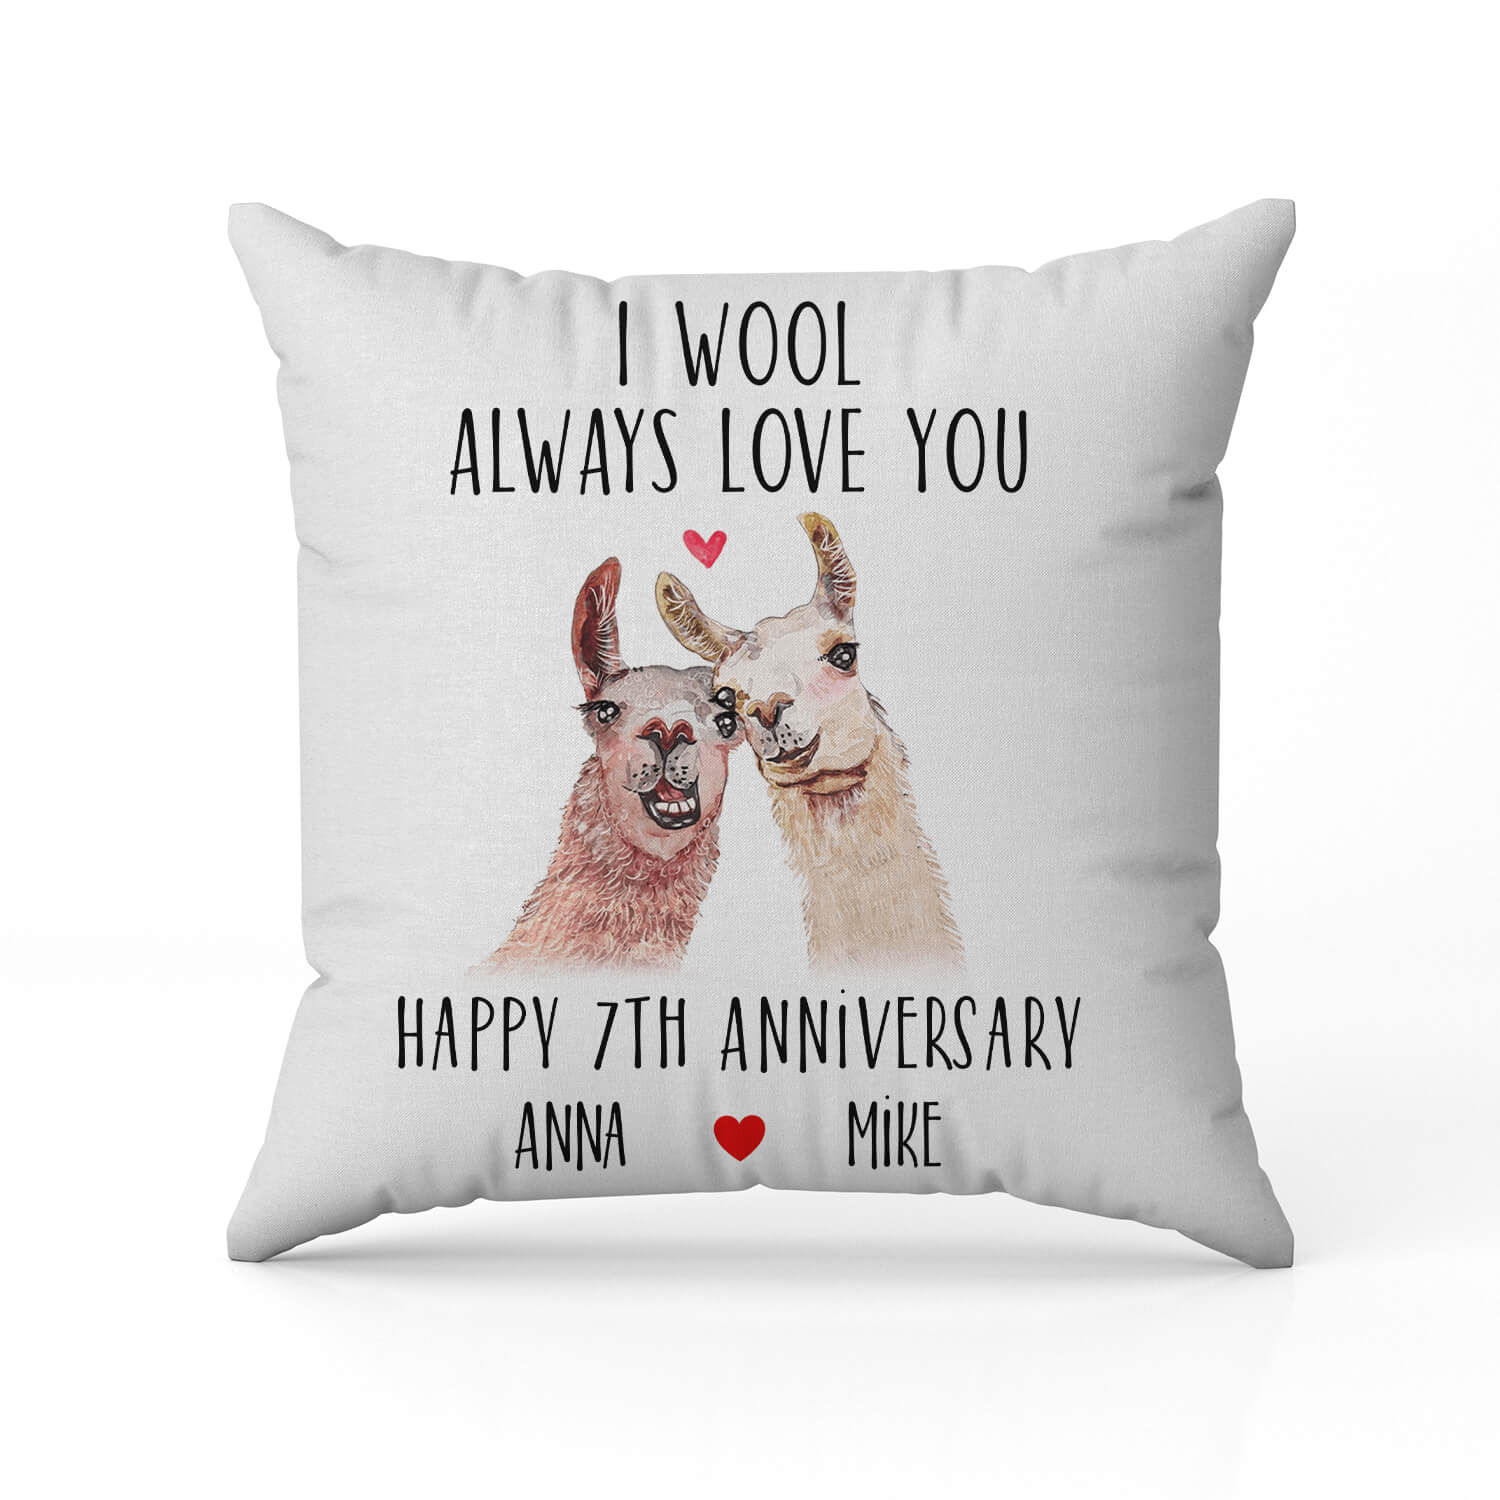 I Wool Always Love You - Personalized 7 Year Anniversary gift for Husband or Wife - Custom Pillow - MyMindfulGifts